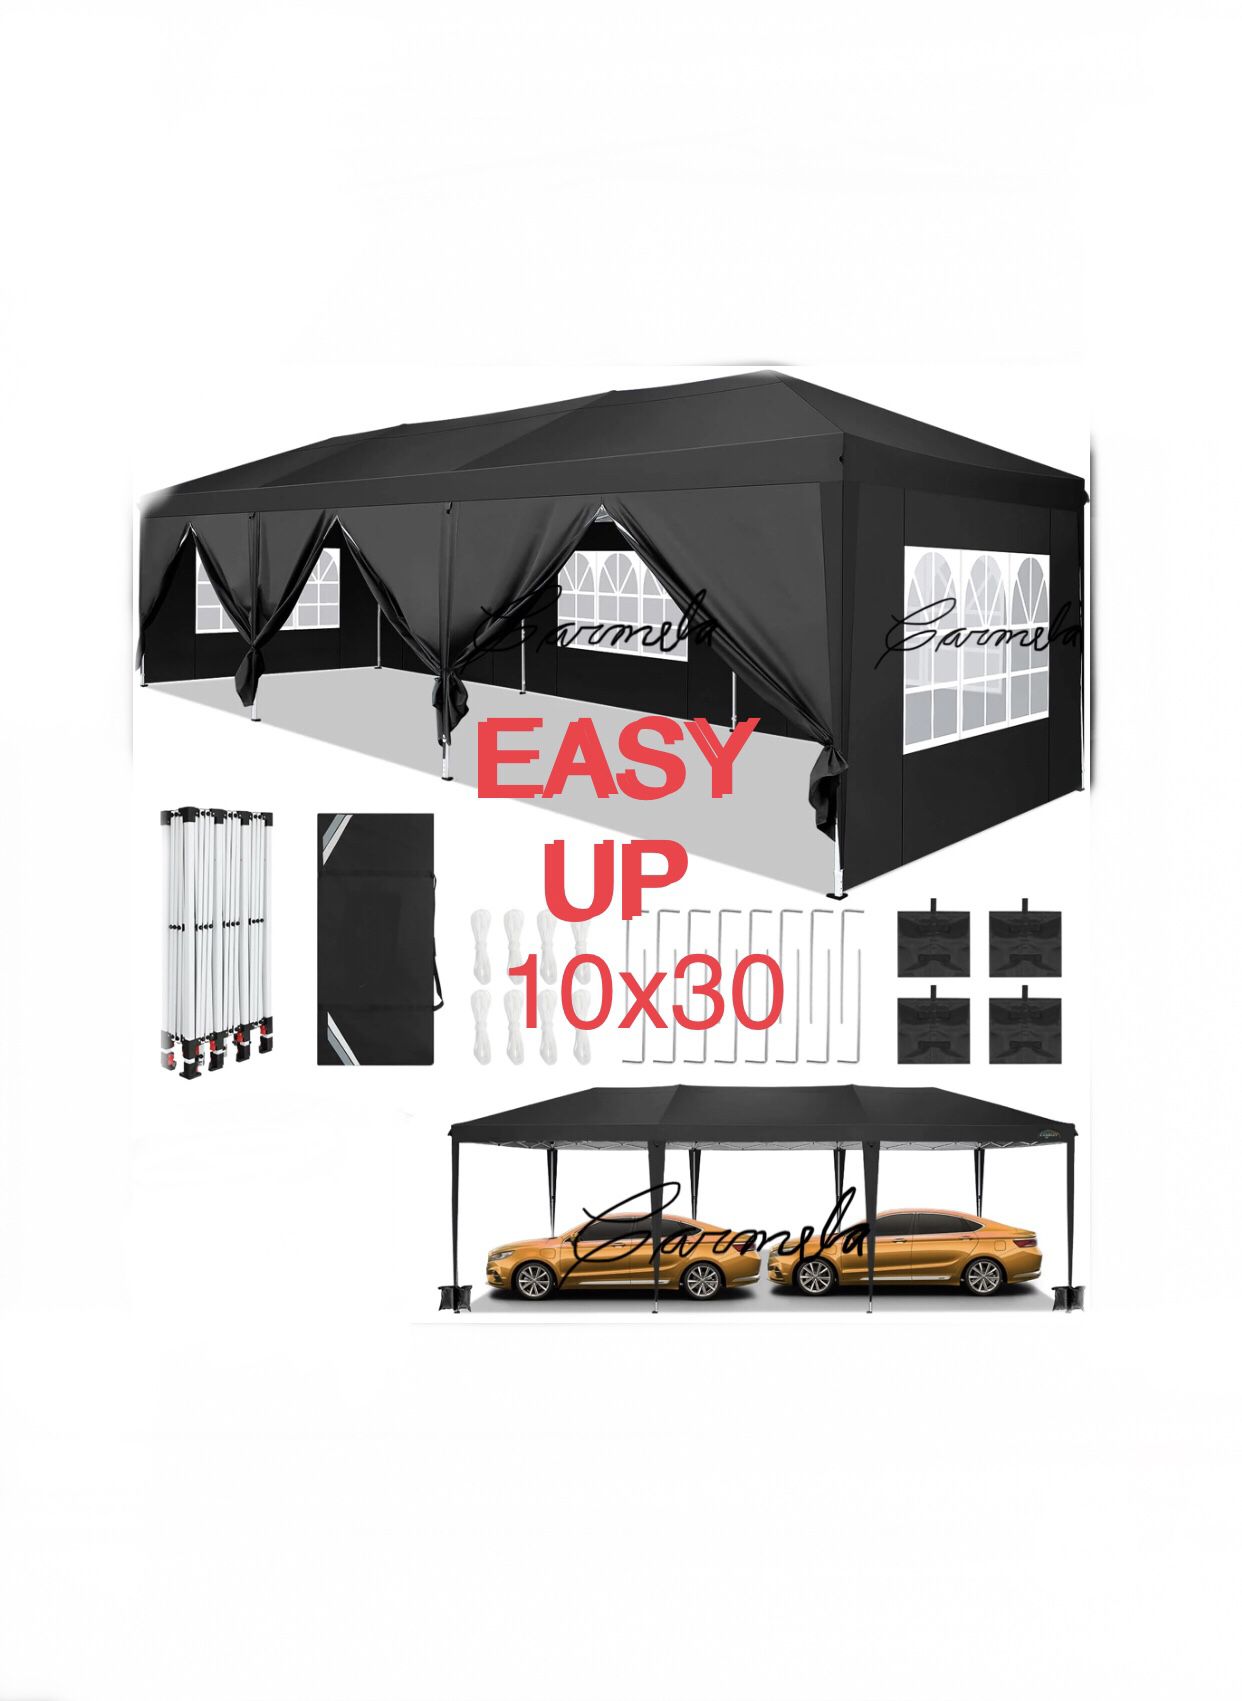 10x30 EASY Set UP wedding party tent outdoor canopy tent with side walls white FOR SALE 